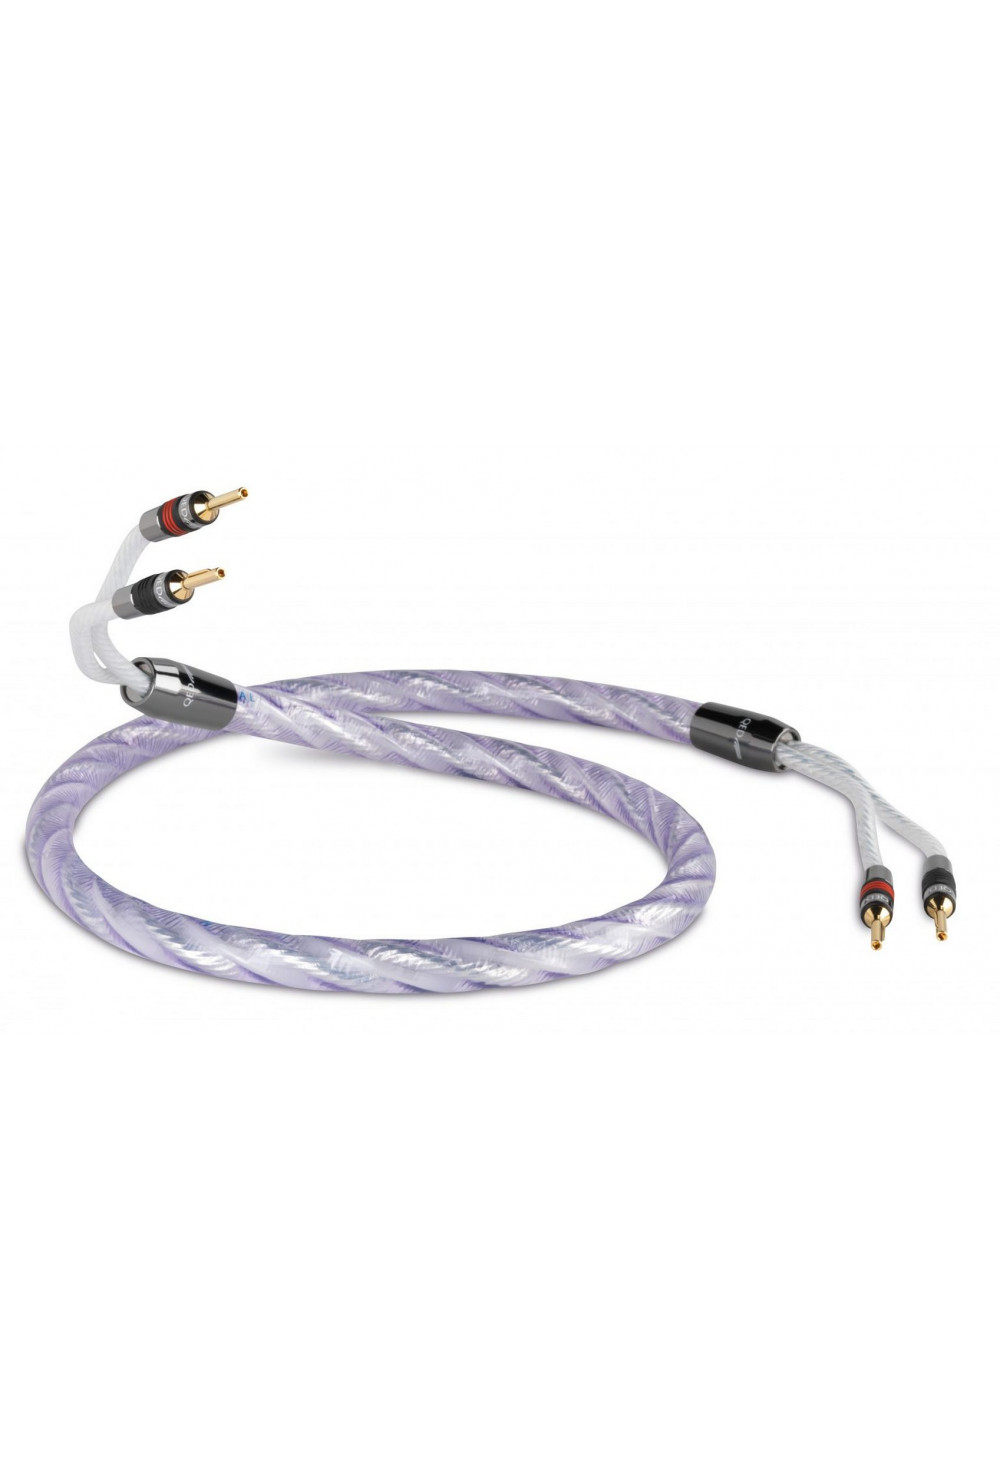 QED GENESIS PRE-TERM CABLE